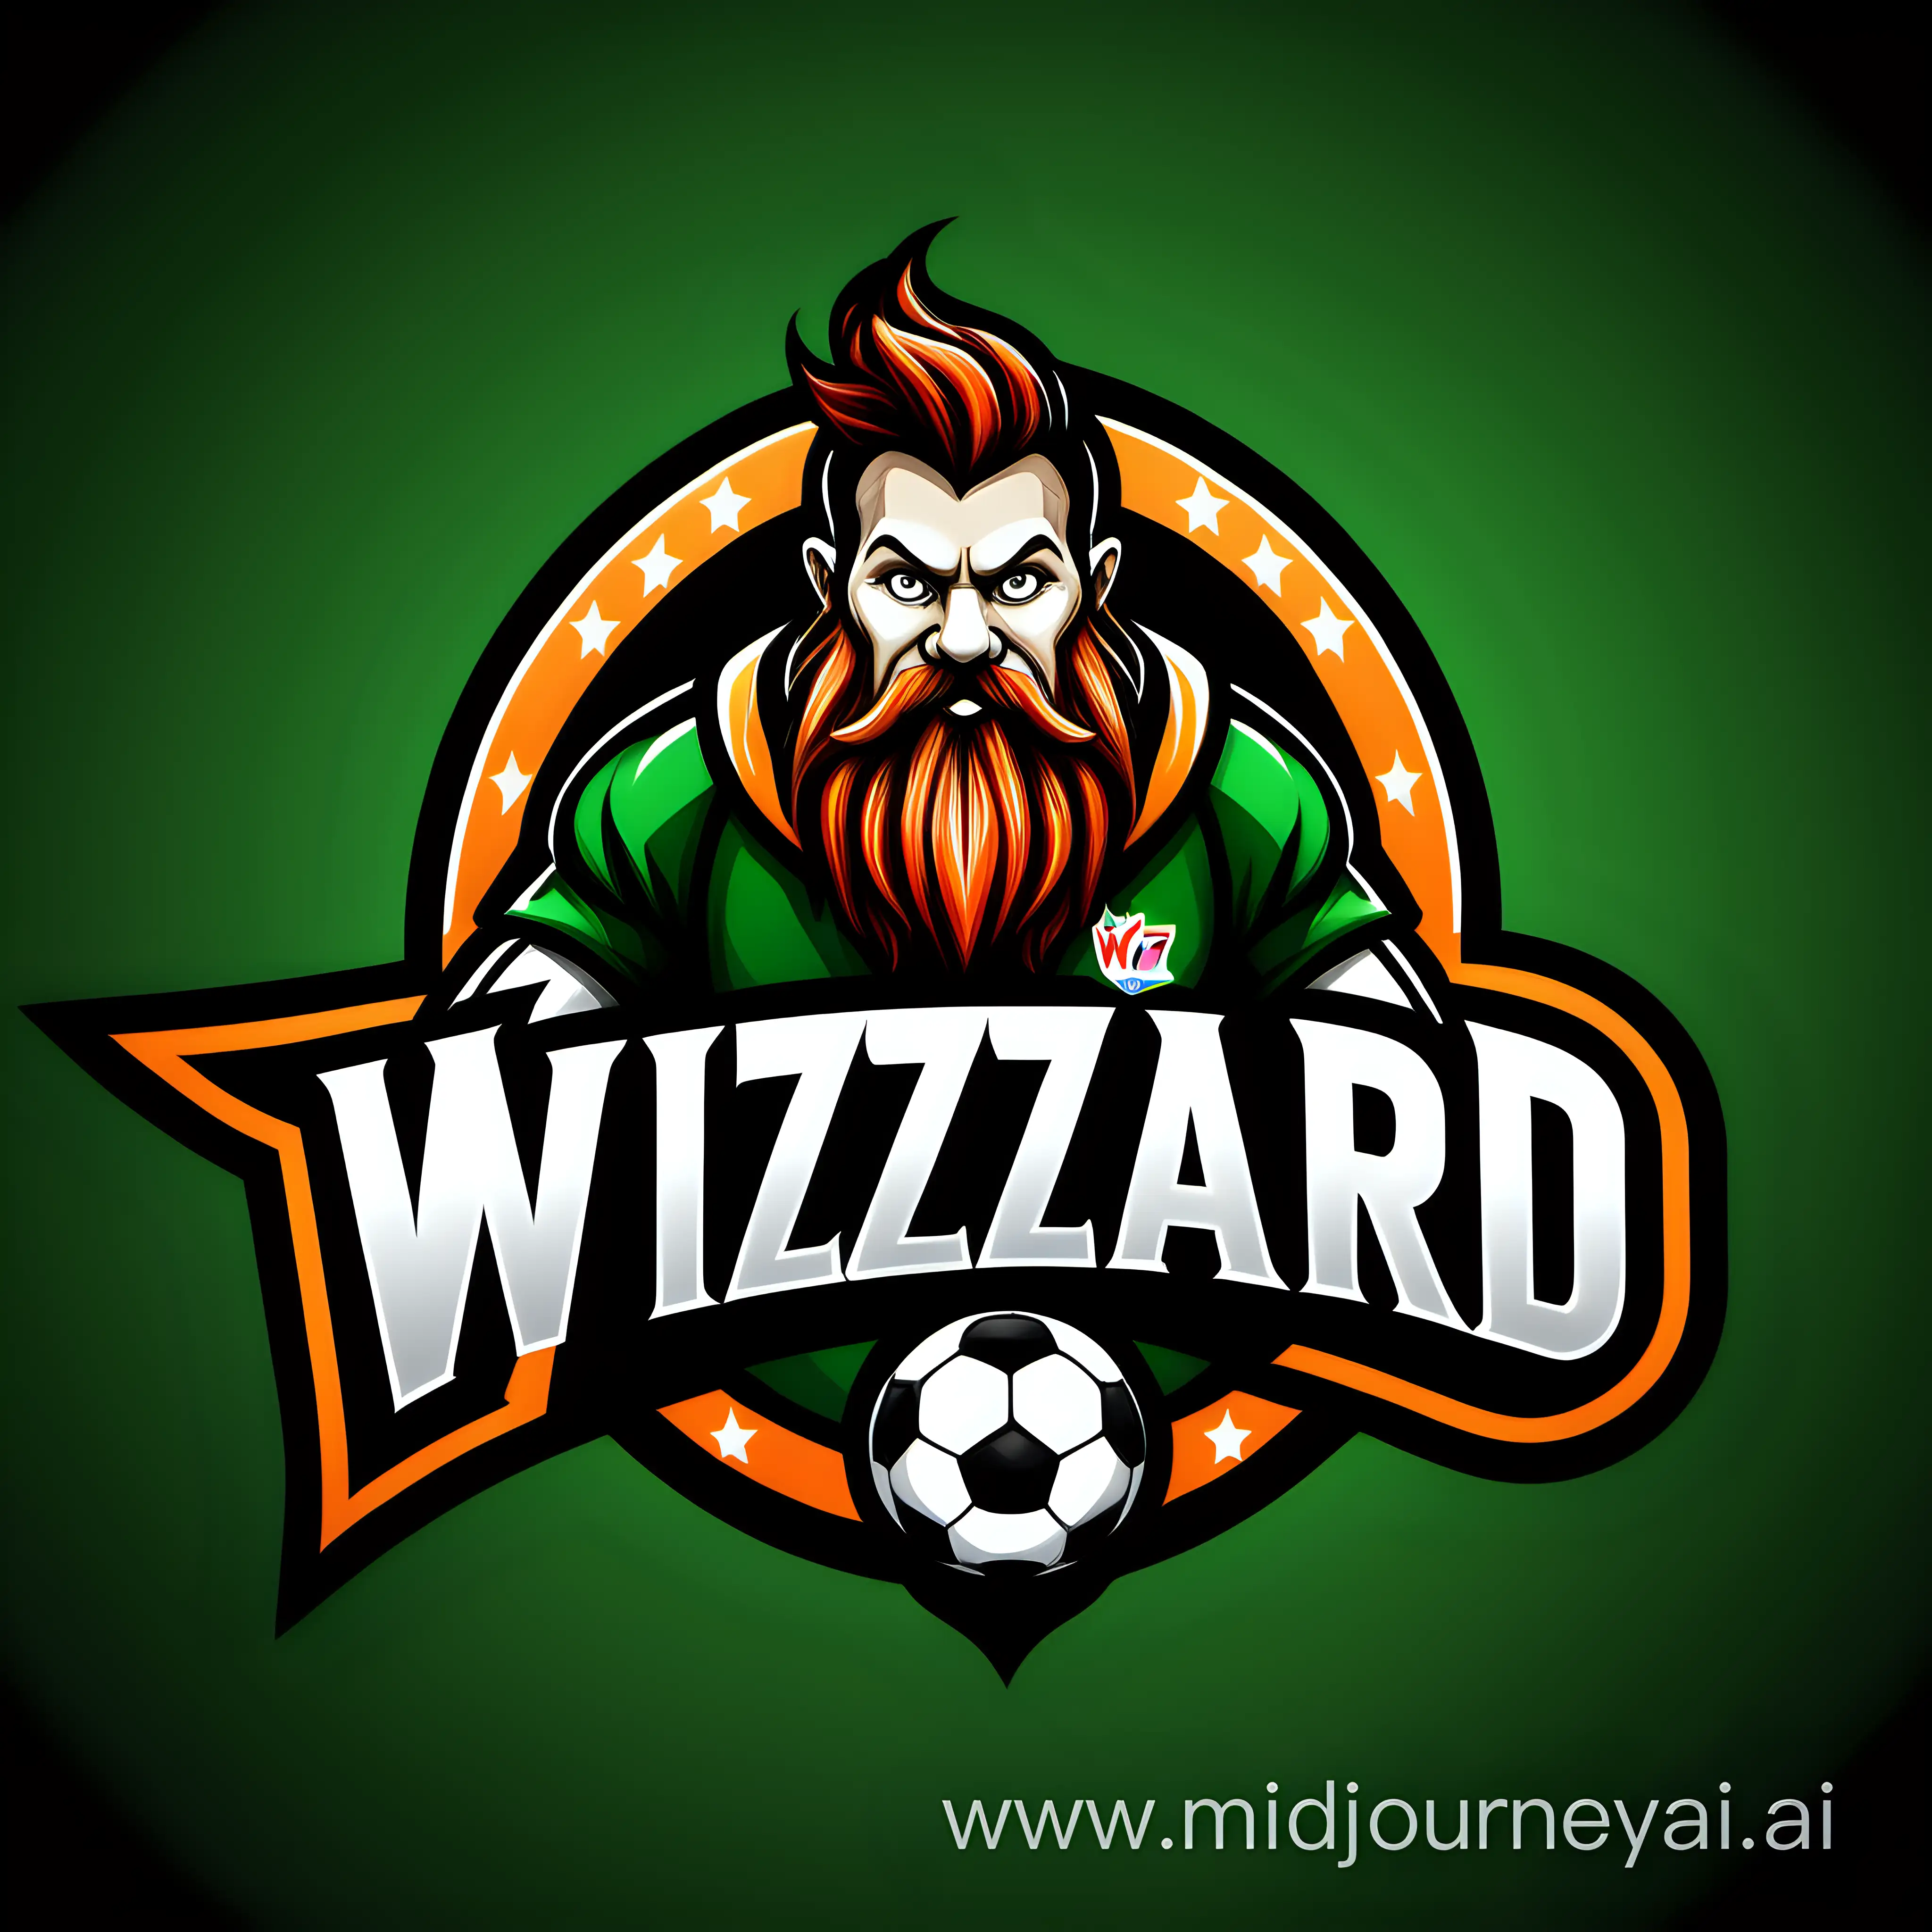 create a logo design for an app called football wizzard that is about soccer fantasy and predicting the right score for leagues and weekend games